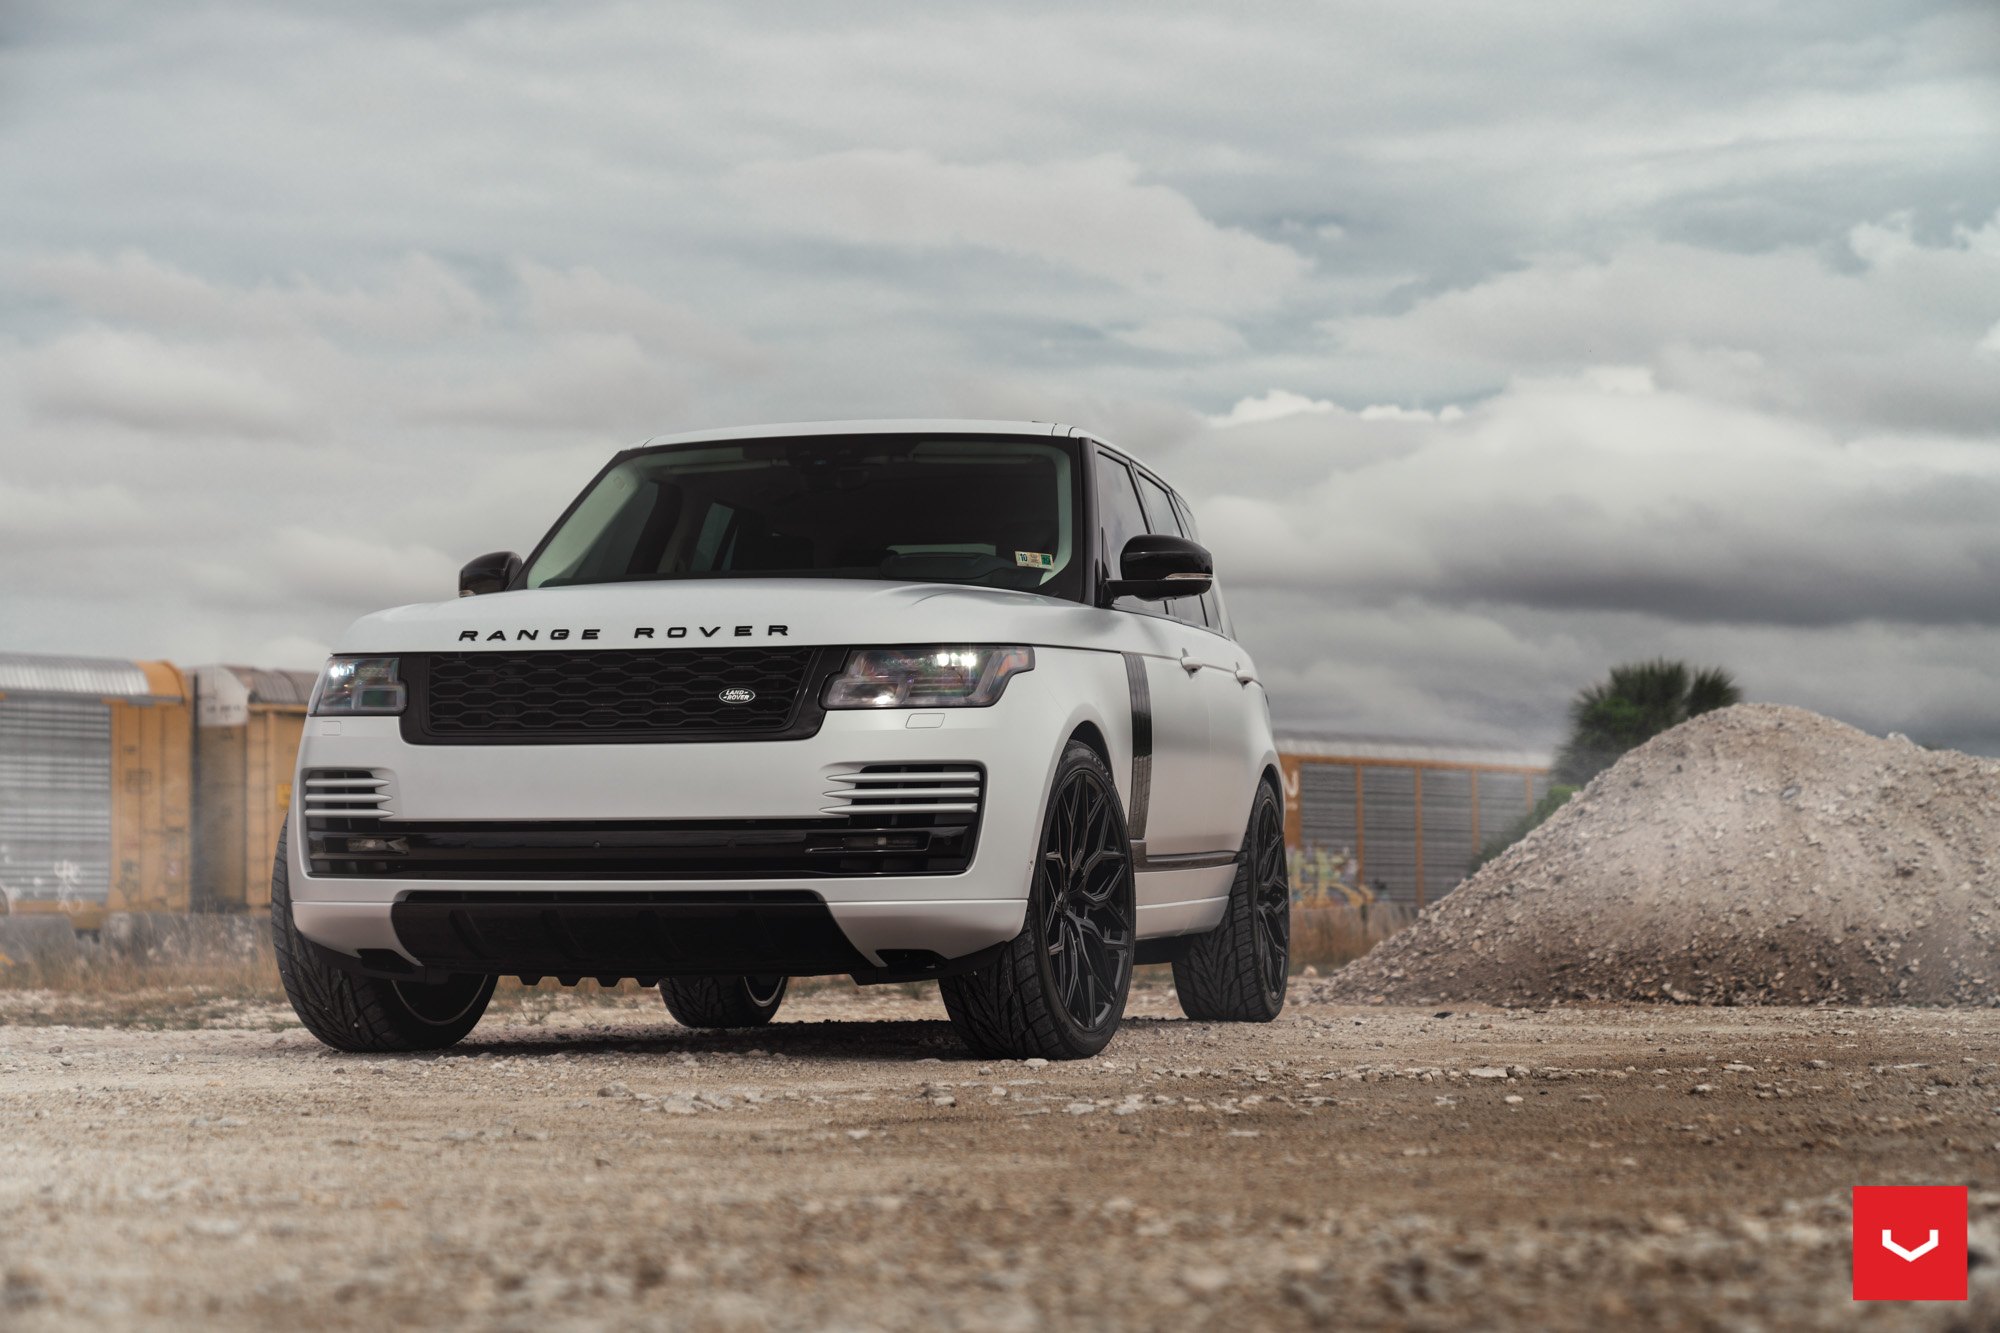 White Range Rover with Blacked Out Mesh Grille - Photo by Vossen Wheels